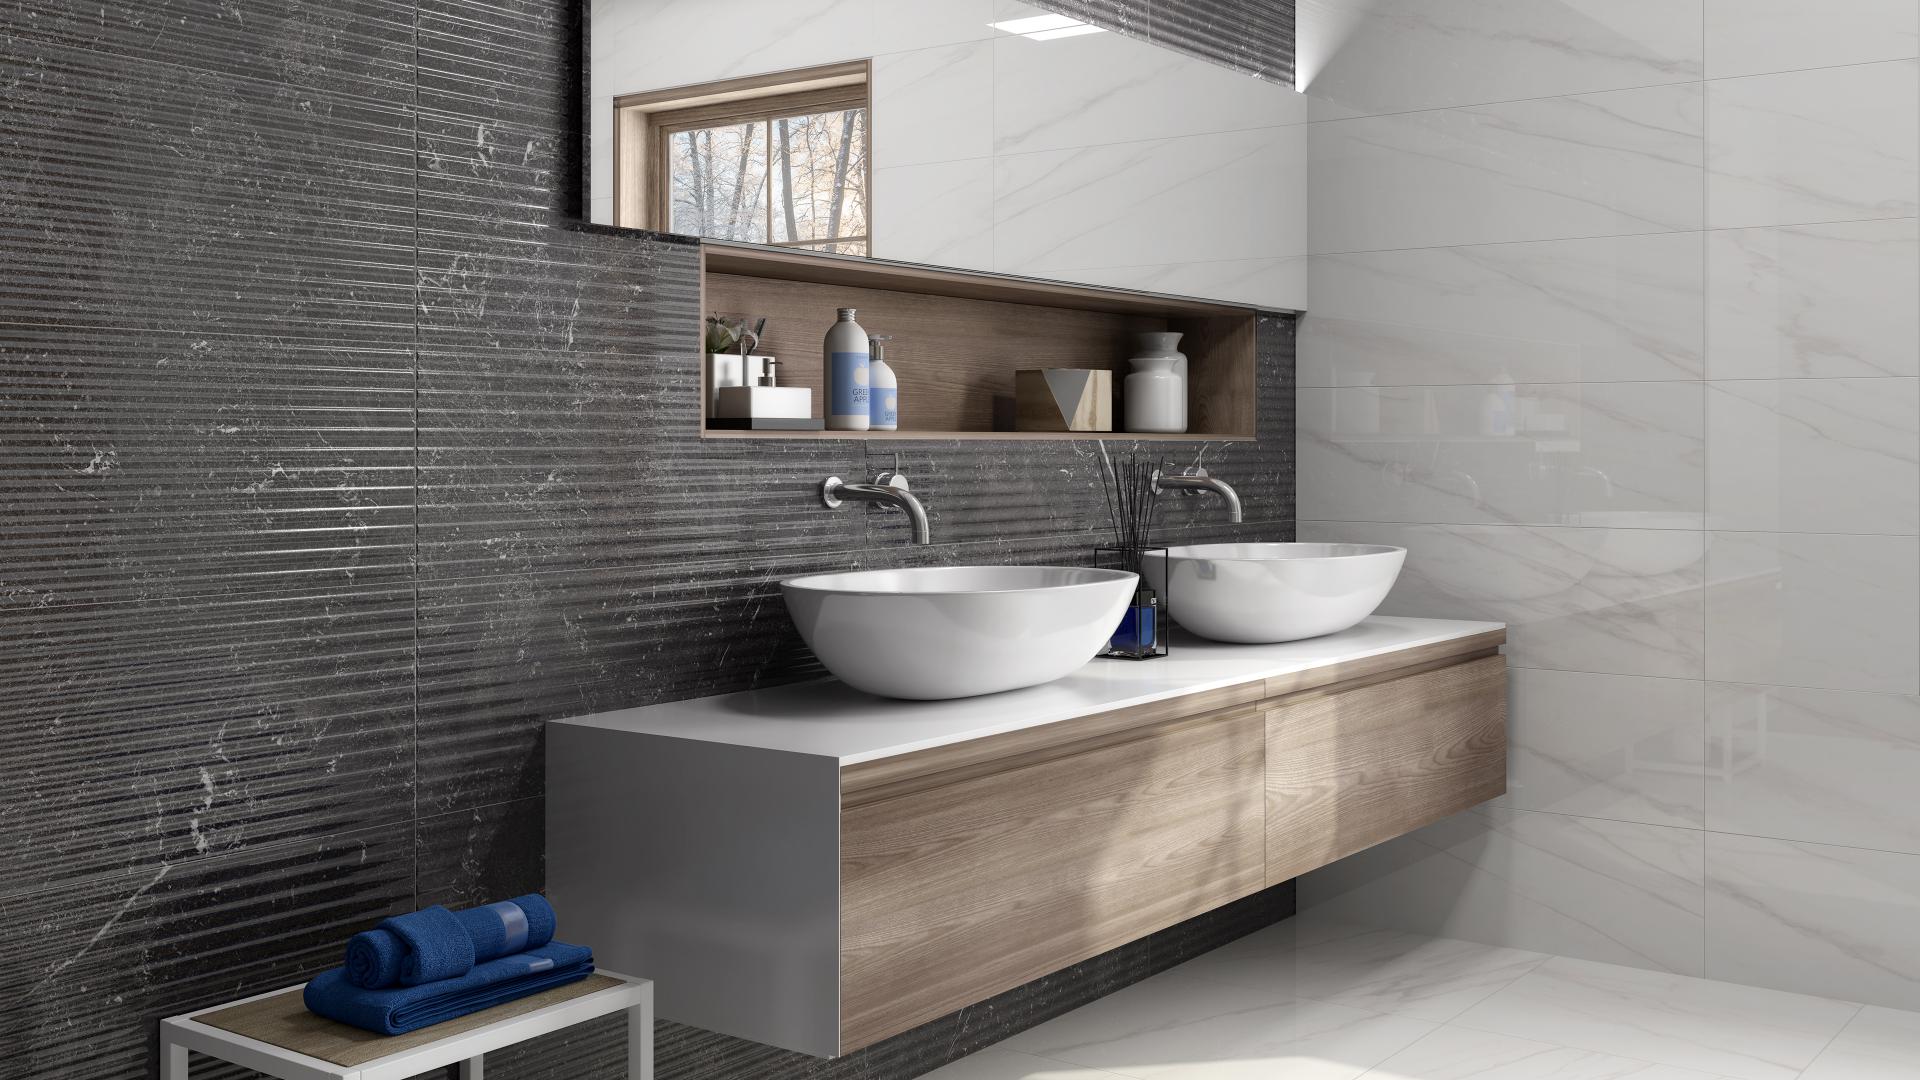 571 Tiles dublin waterloo bathrooms commercial contracts ireland supply and fit luxury.jpg